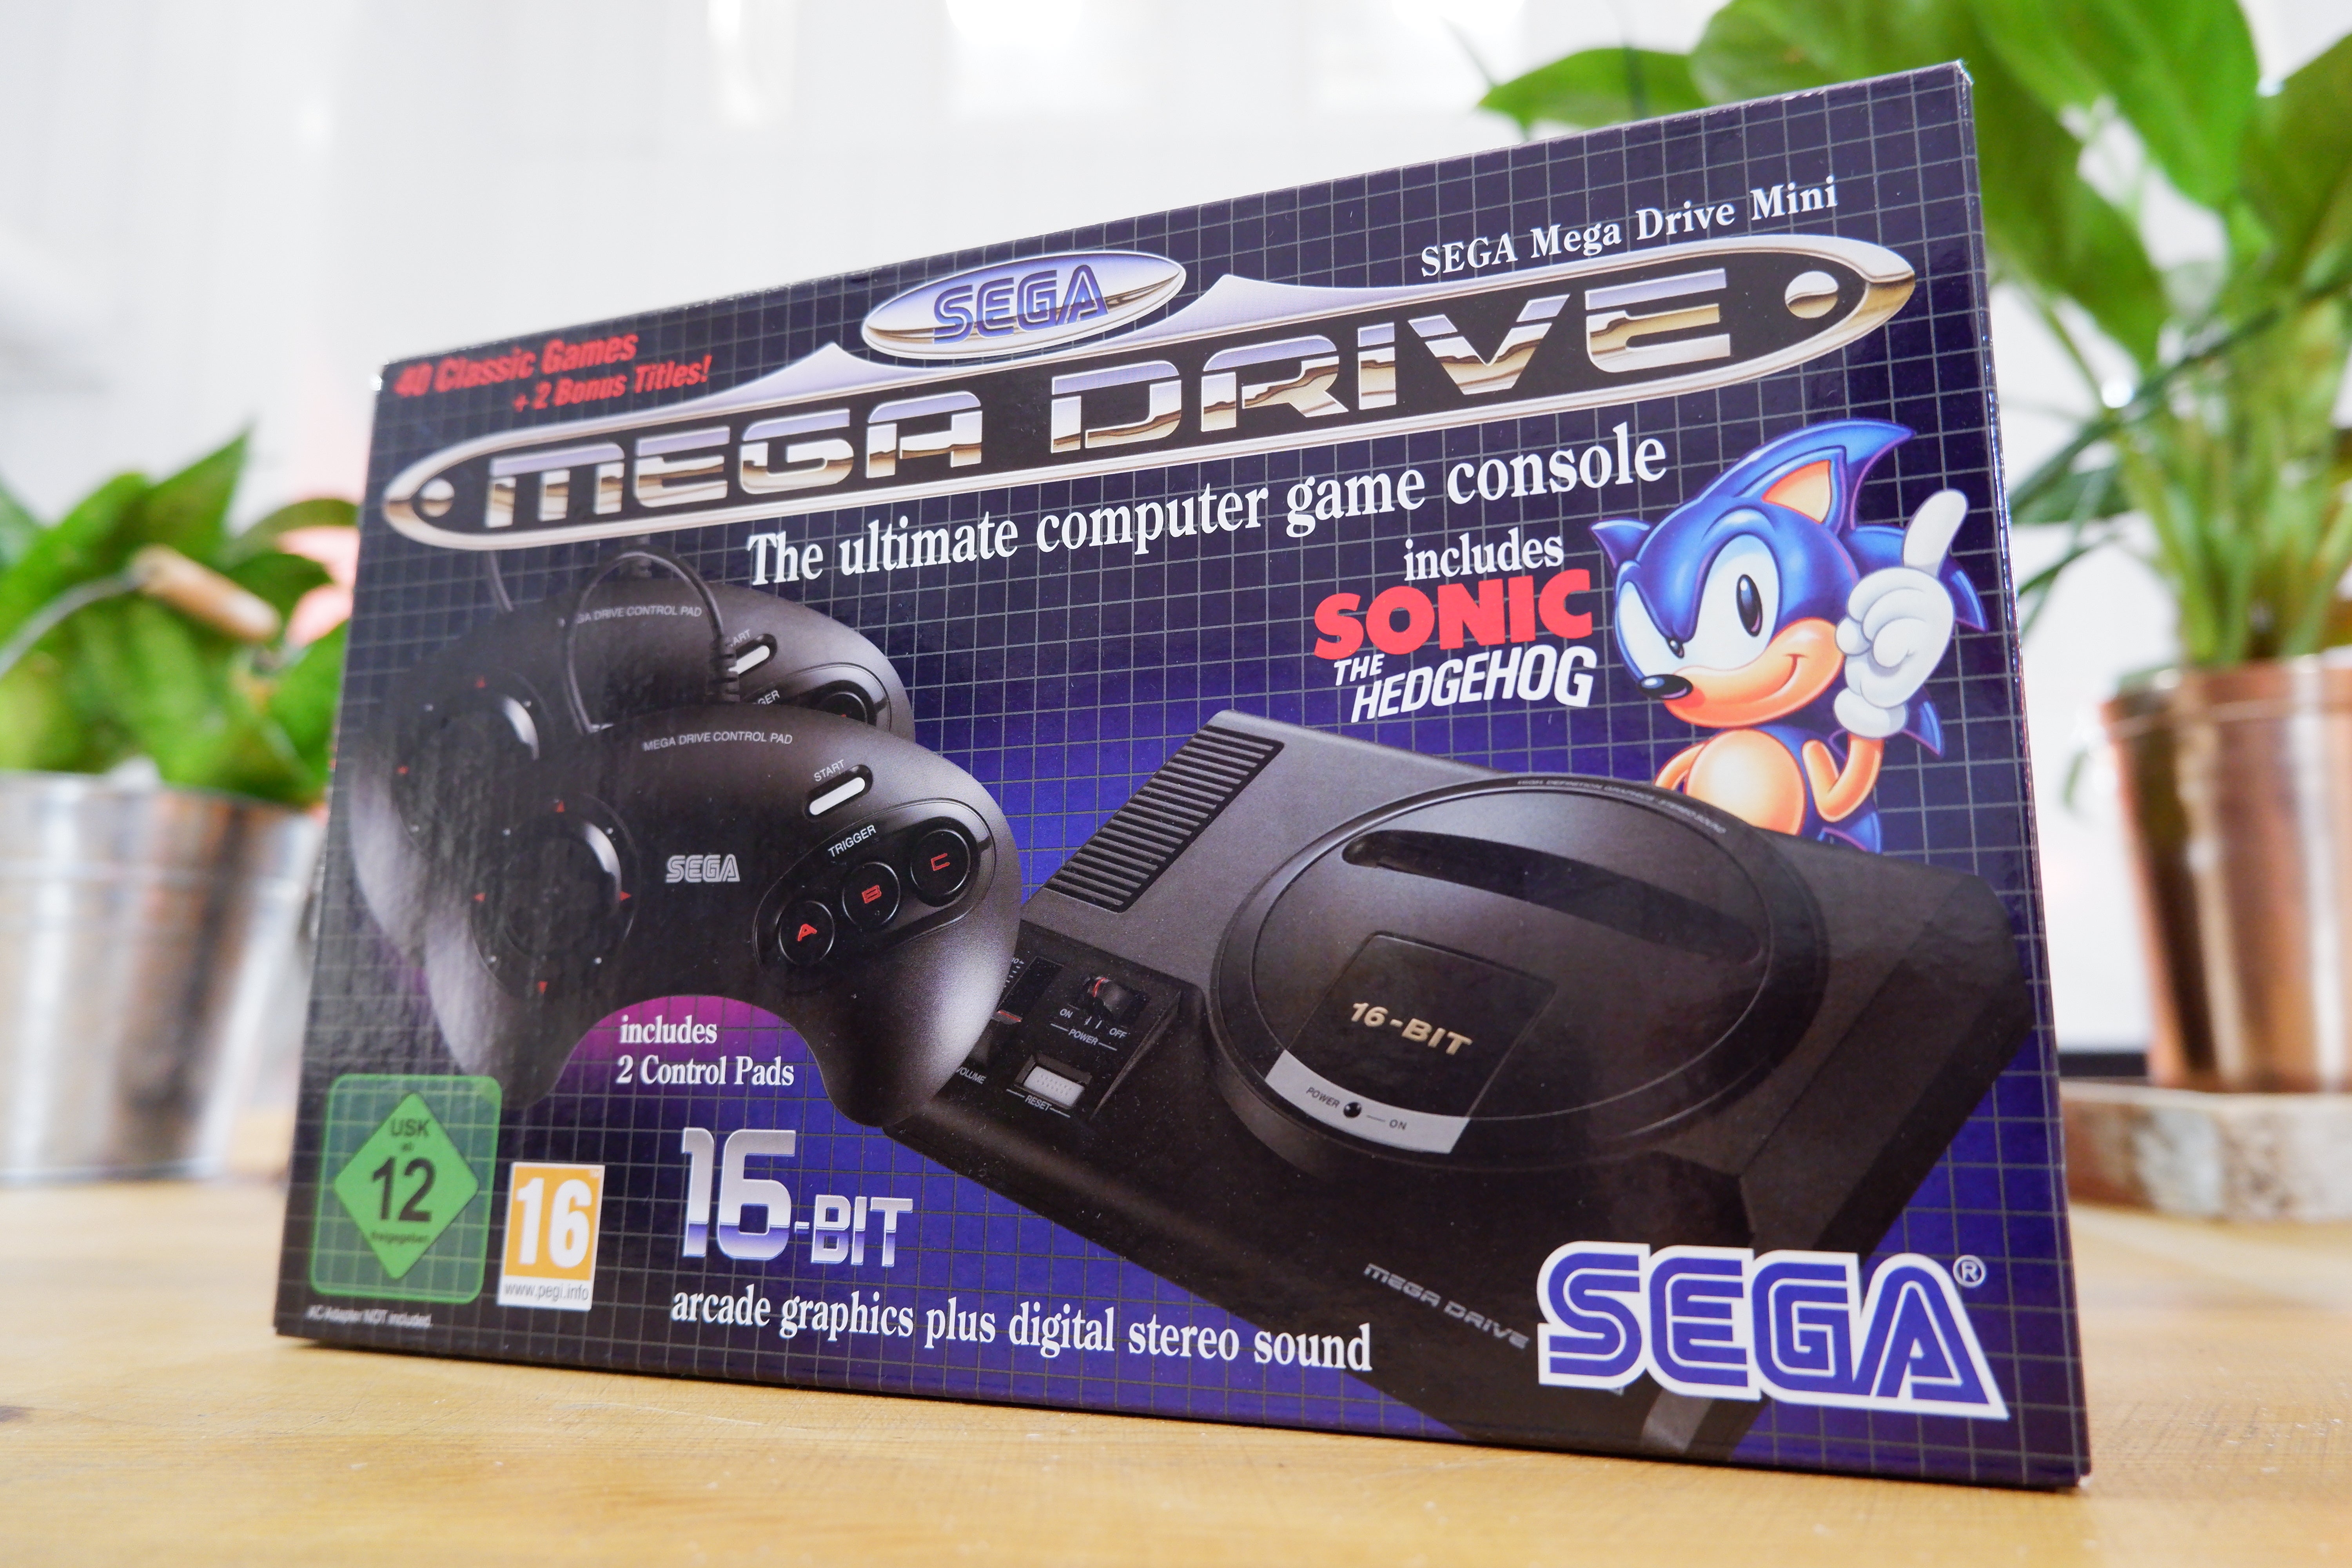 In most cases spur Outflow Sega Mega Drive Mini Review | Trusted Reviews